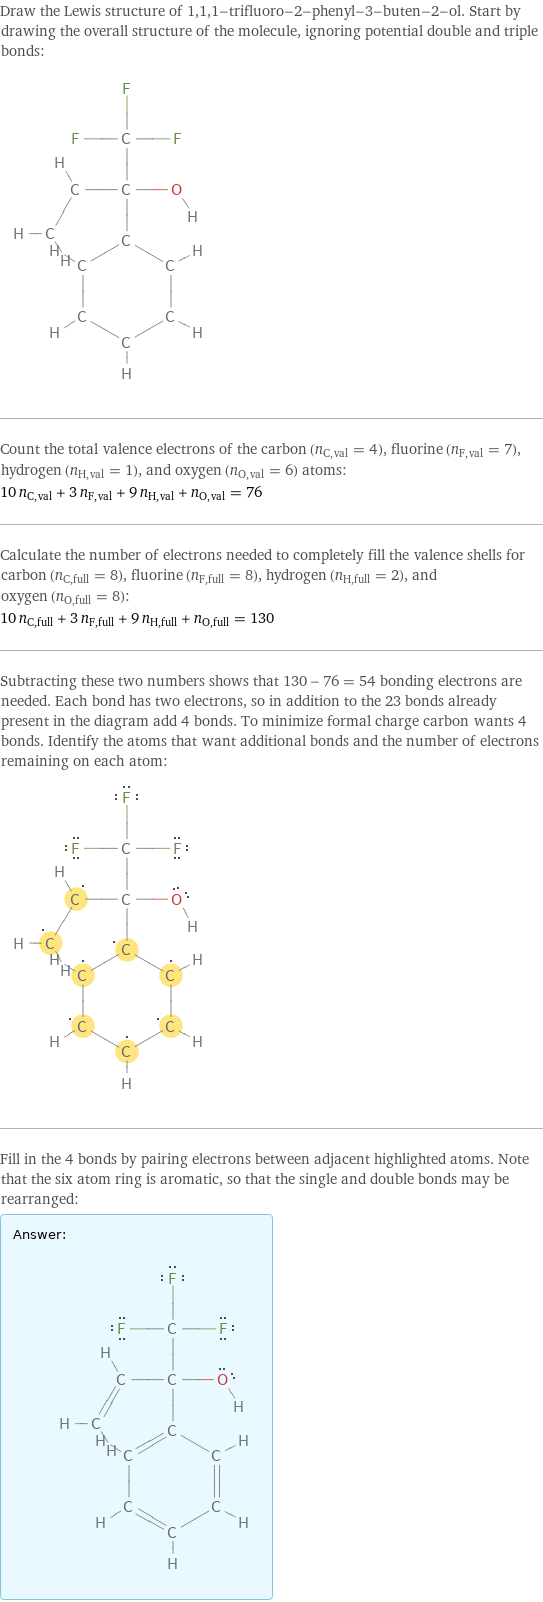 Draw the Lewis structure of 1, 1, 1-trifluoro-2-phenyl-3-buten-2-ol. Start by drawing the overall structure of the molecule, ignoring potential double and triple bonds:  Count the total valence electrons of the carbon (n_C, val = 4), fluorine (n_F, val = 7), hydrogen (n_H, val = 1), and oxygen (n_O, val = 6) atoms: 10 n_C, val + 3 n_F, val + 9 n_H, val + n_O, val = 76 Calculate the number of electrons needed to completely fill the valence shells for carbon (n_C, full = 8), fluorine (n_F, full = 8), hydrogen (n_H, full = 2), and oxygen (n_O, full = 8): 10 n_C, full + 3 n_F, full + 9 n_H, full + n_O, full = 130 Subtracting these two numbers shows that 130 - 76 = 54 bonding electrons are needed. Each bond has two electrons, so in addition to the 23 bonds already present in the diagram add 4 bonds. To minimize formal charge carbon wants 4 bonds. Identify the atoms that want additional bonds and the number of electrons remaining on each atom:  Fill in the 4 bonds by pairing electrons between adjacent highlighted atoms. Note that the six atom ring is aromatic, so that the single and double bonds may be rearranged: Answer: |   | 